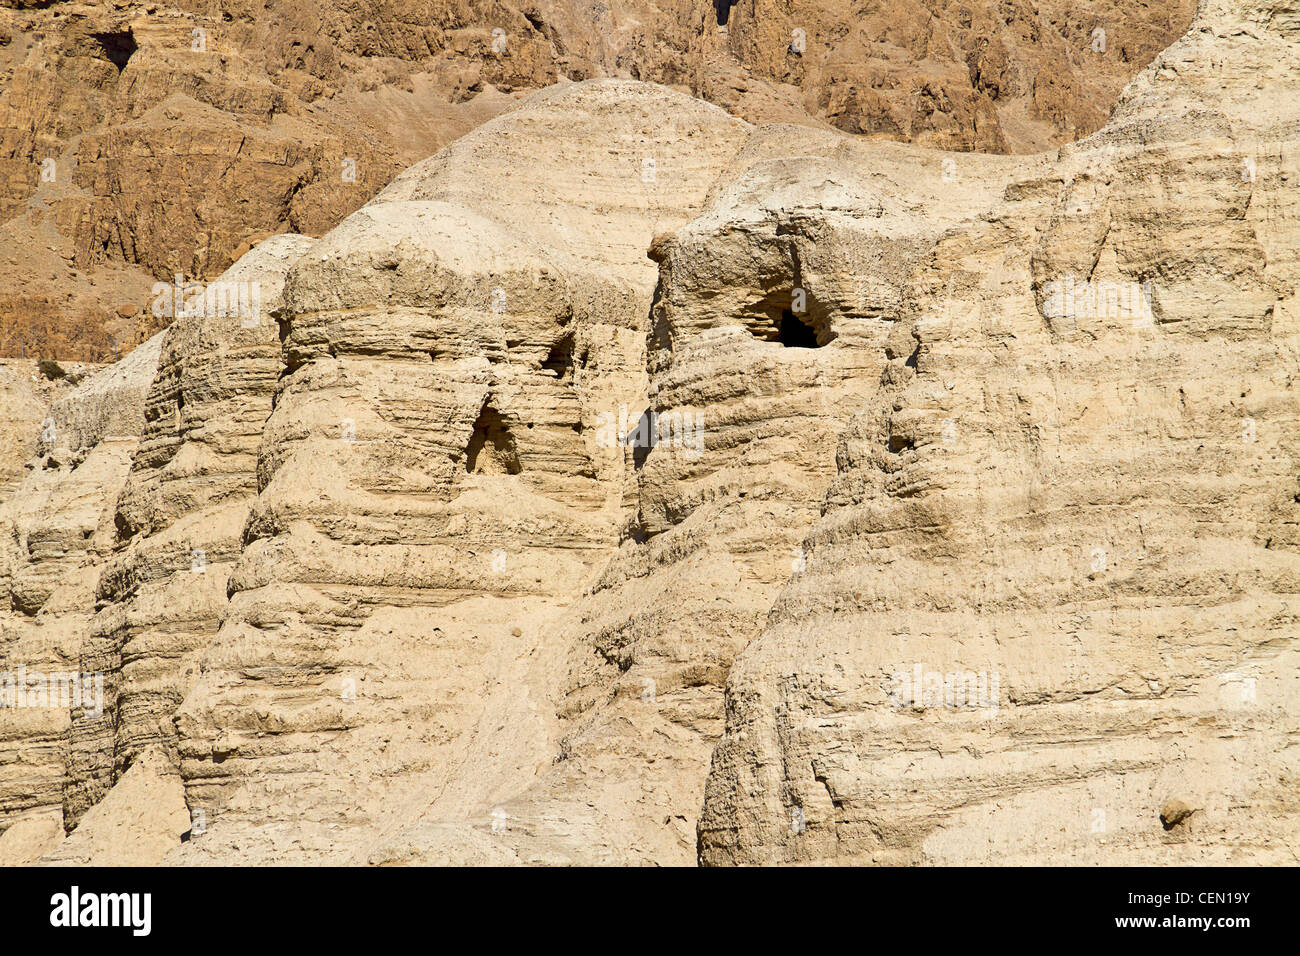 Caves in the Israeli desert outside Jersualem where the dead sea scrolls were found. Stock Photo